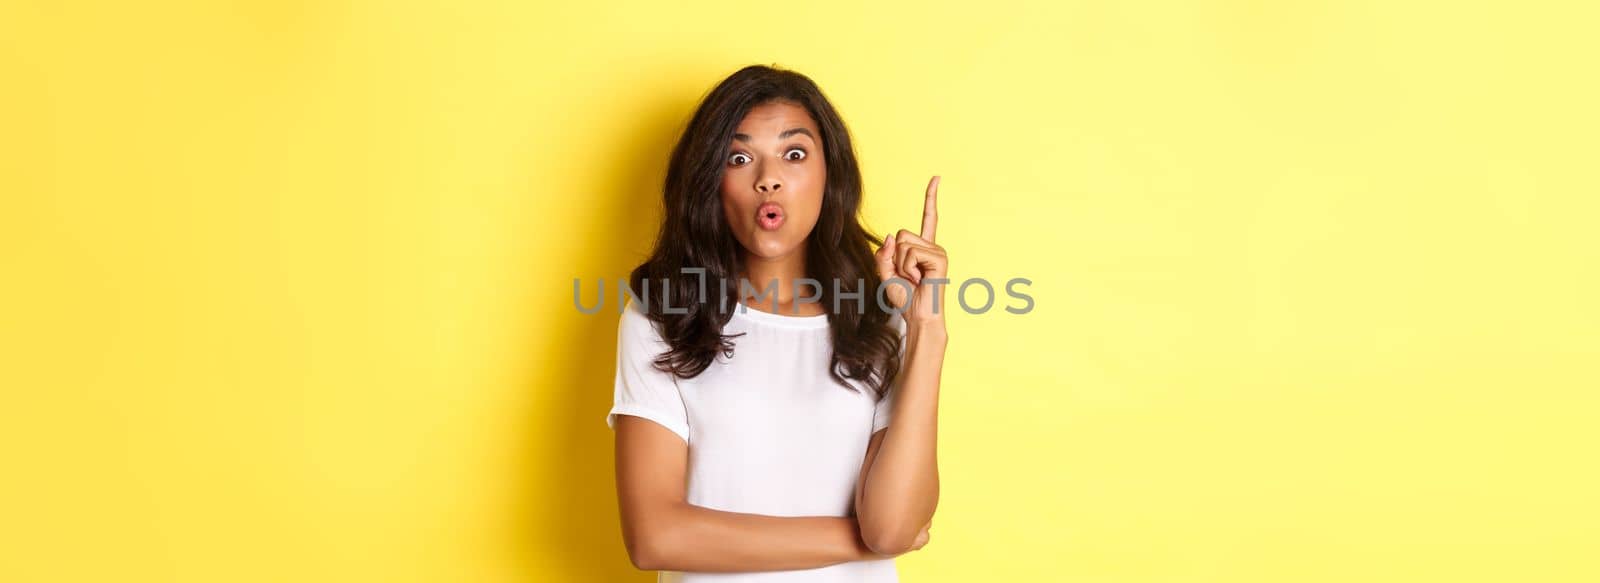 Portrait of smart african-american female student having a solution, suggesting idea, raising finger and looking excited, standing over yellow background.